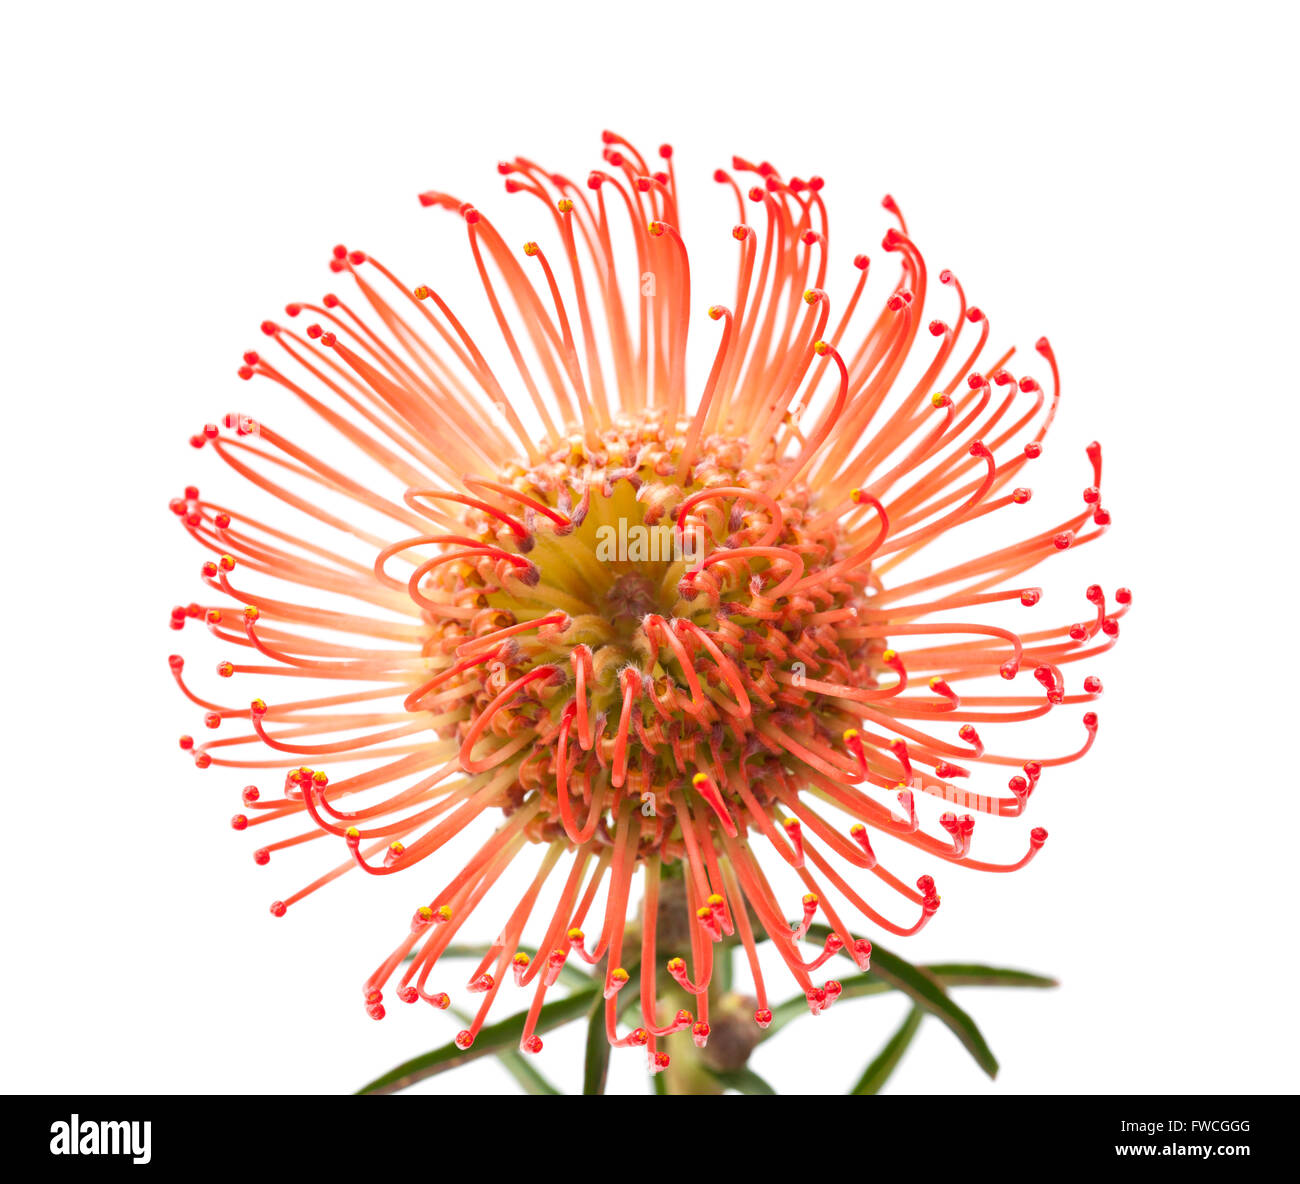 red protea flower isolated on white background Stock Photo